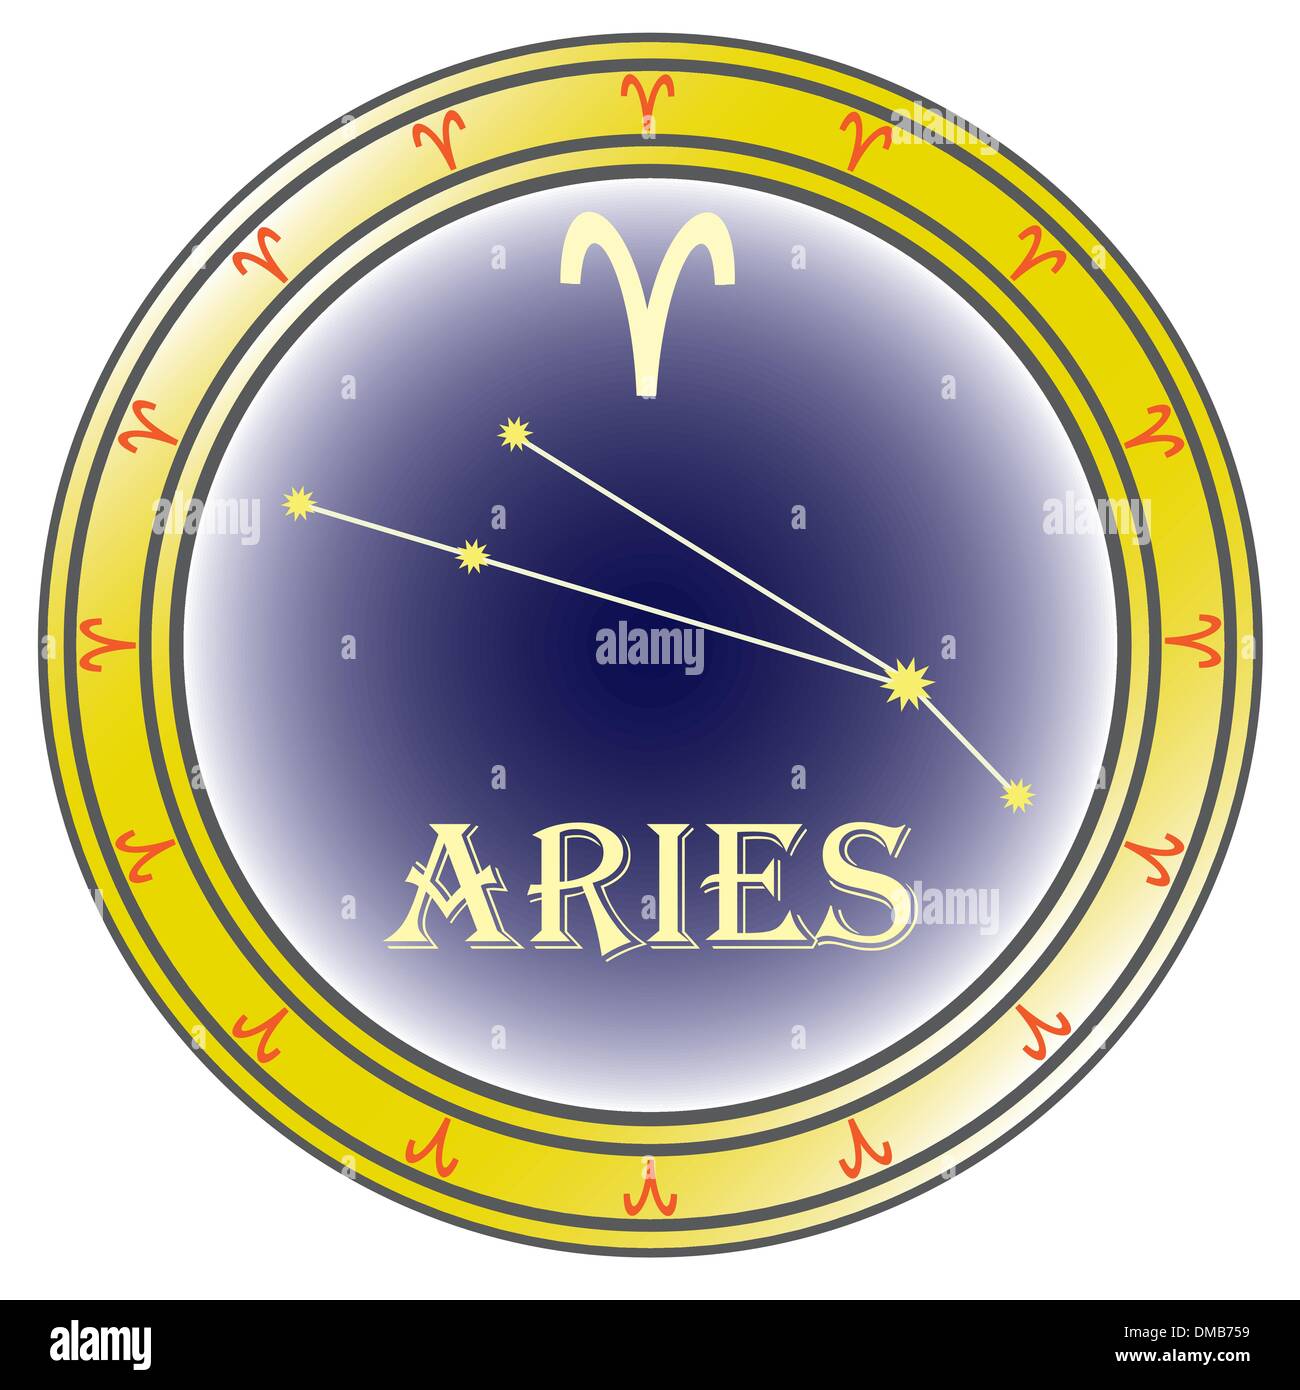 Aries sign Stock Vector Images - Alamy